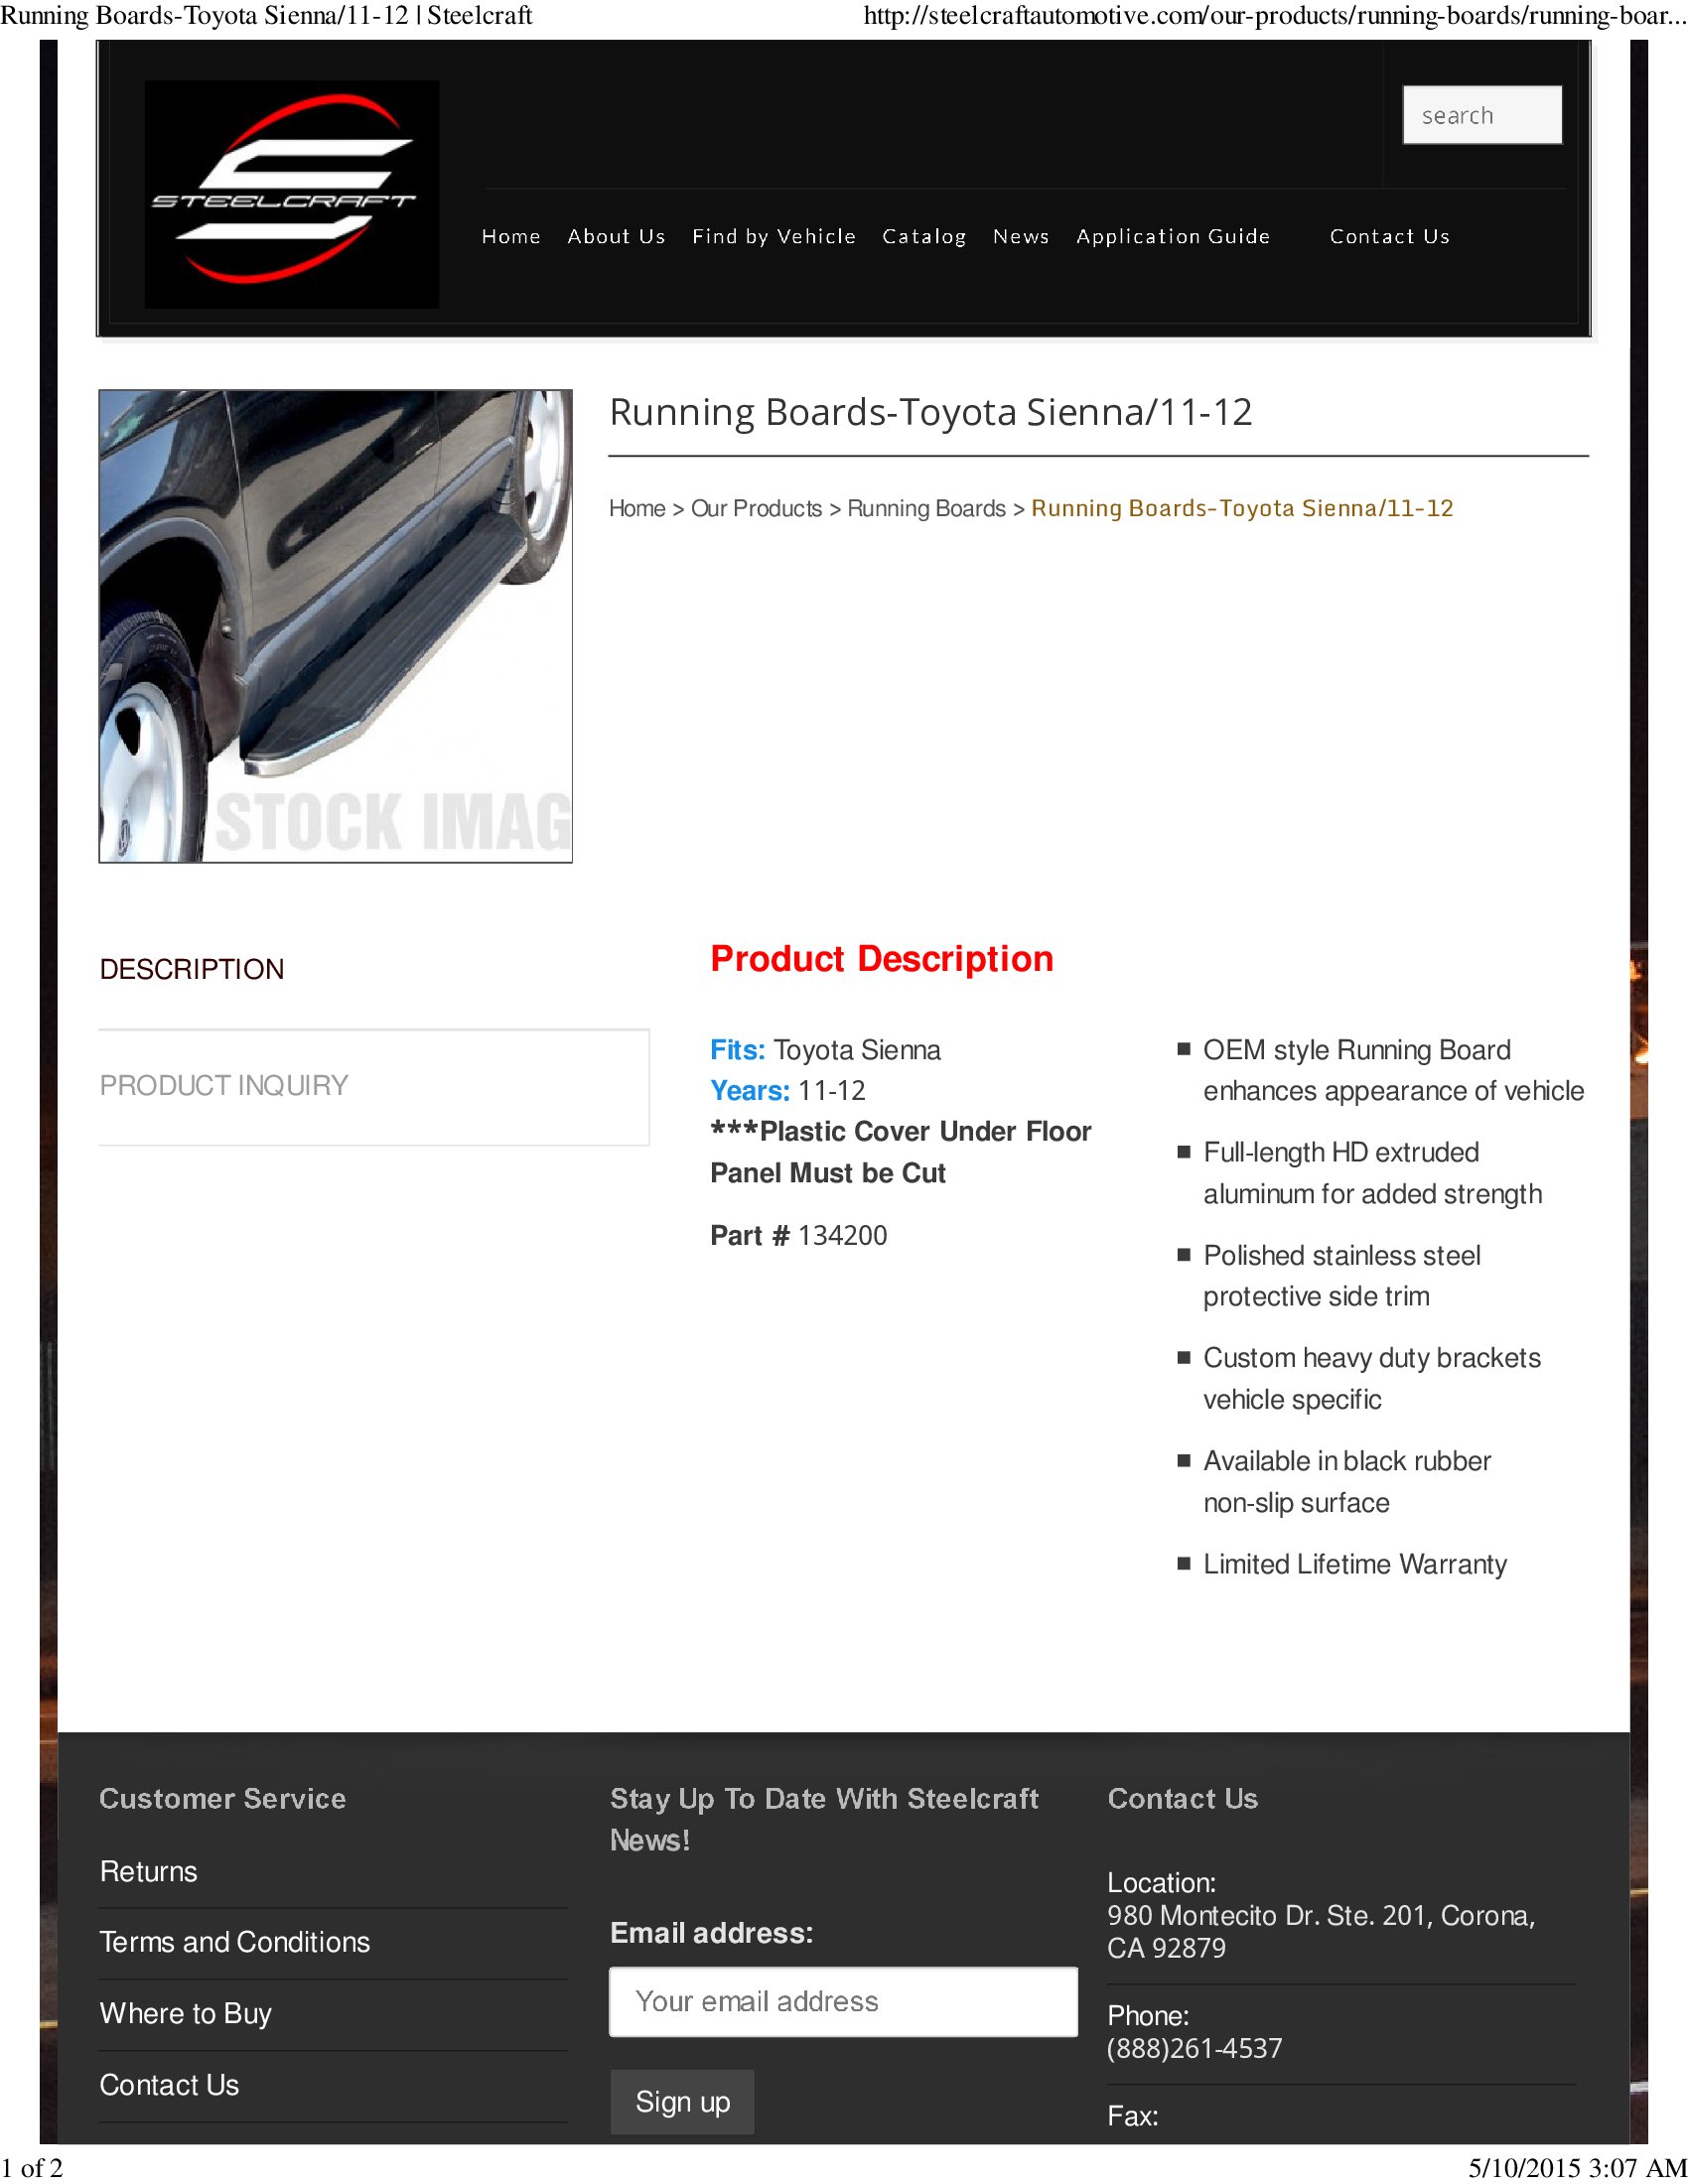 Running Boards From SteelCraft, The manufacturer Stating that They Fit 2011 and 2012 Models